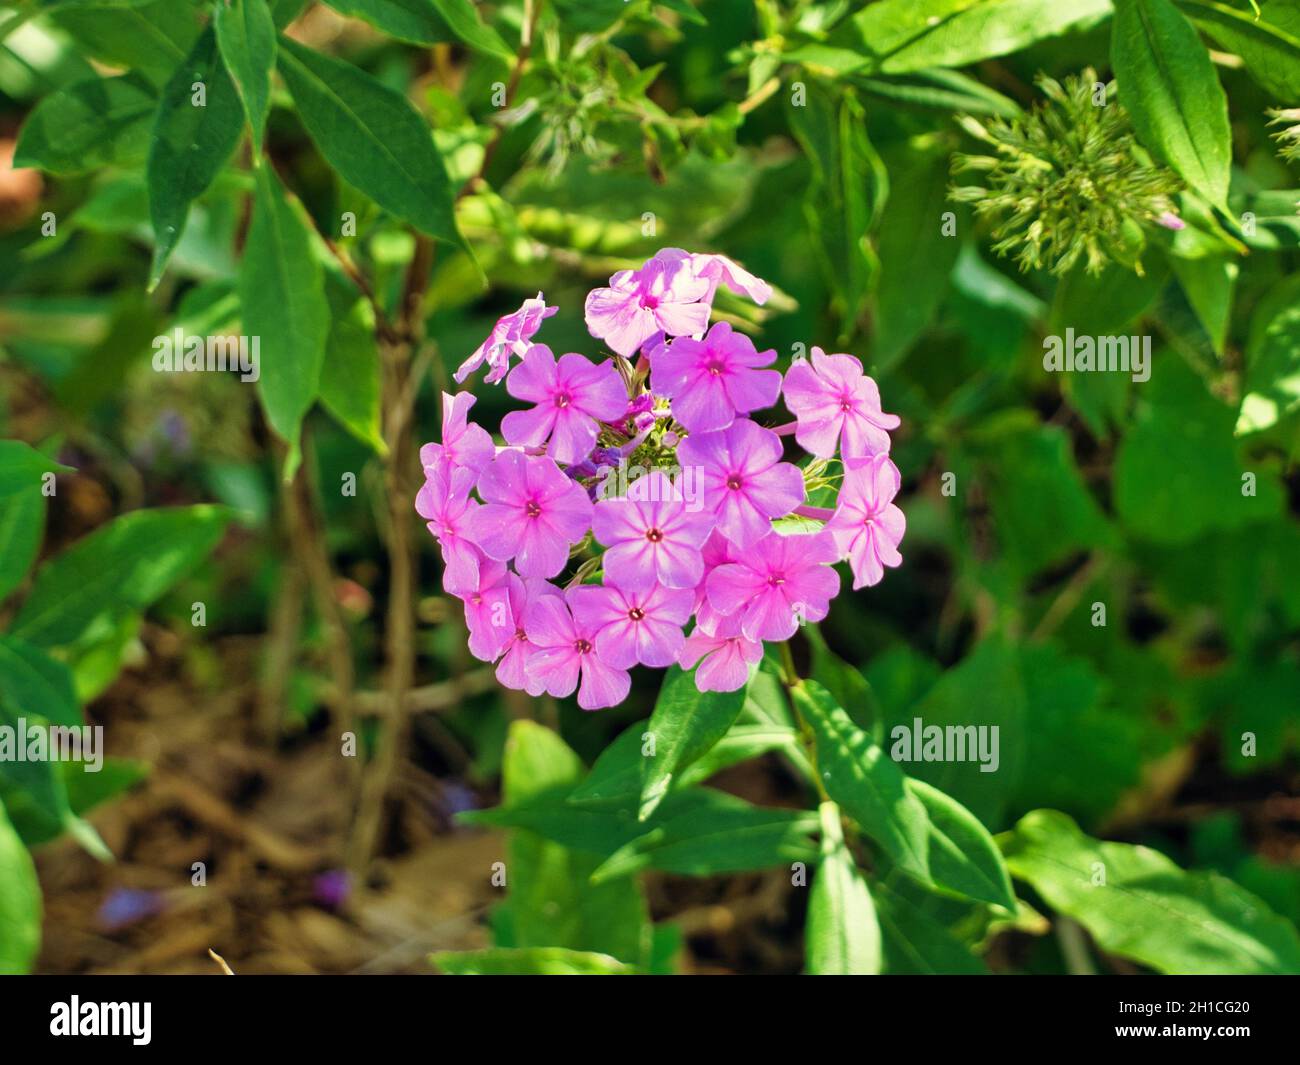 Closeup of the blossomed pink Garden phlox flowers Stock Photo